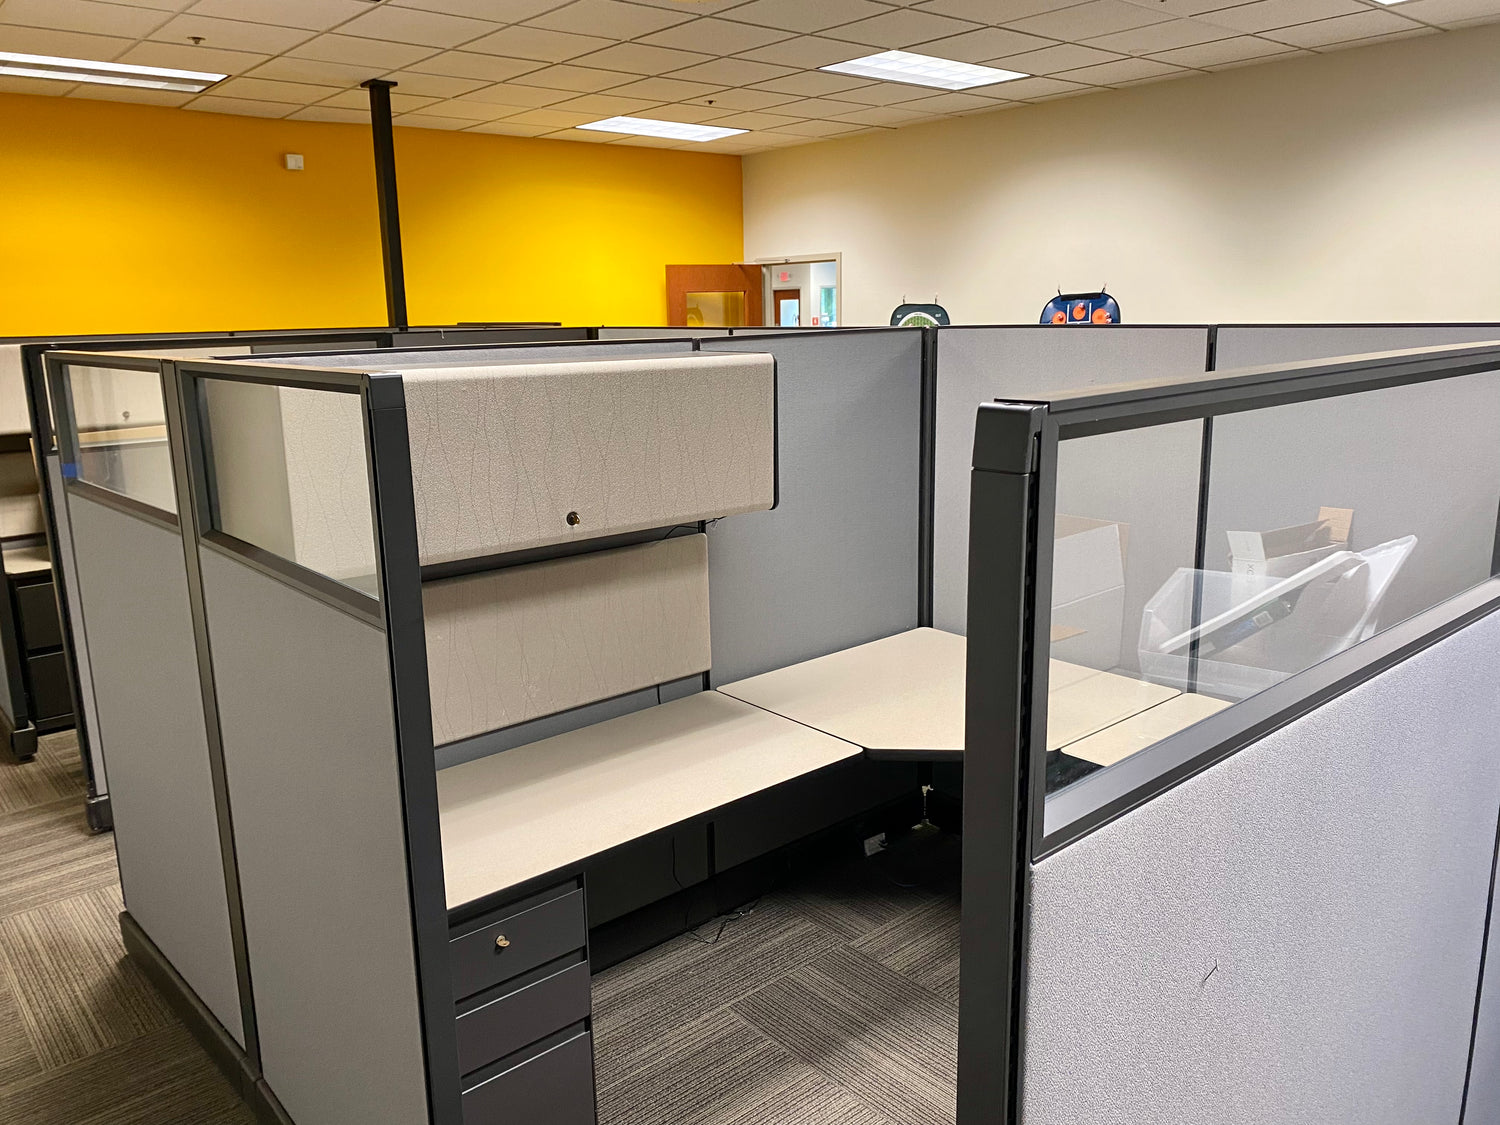 Herman Miller Action Office 2 (AO2) Office Cubicles. Item Highlights: Glass Panels, 2 Filing Drawers, 1 Overhead Bin, Multiple Configuration Options 6x6/6x8, and Ease of Assembly 